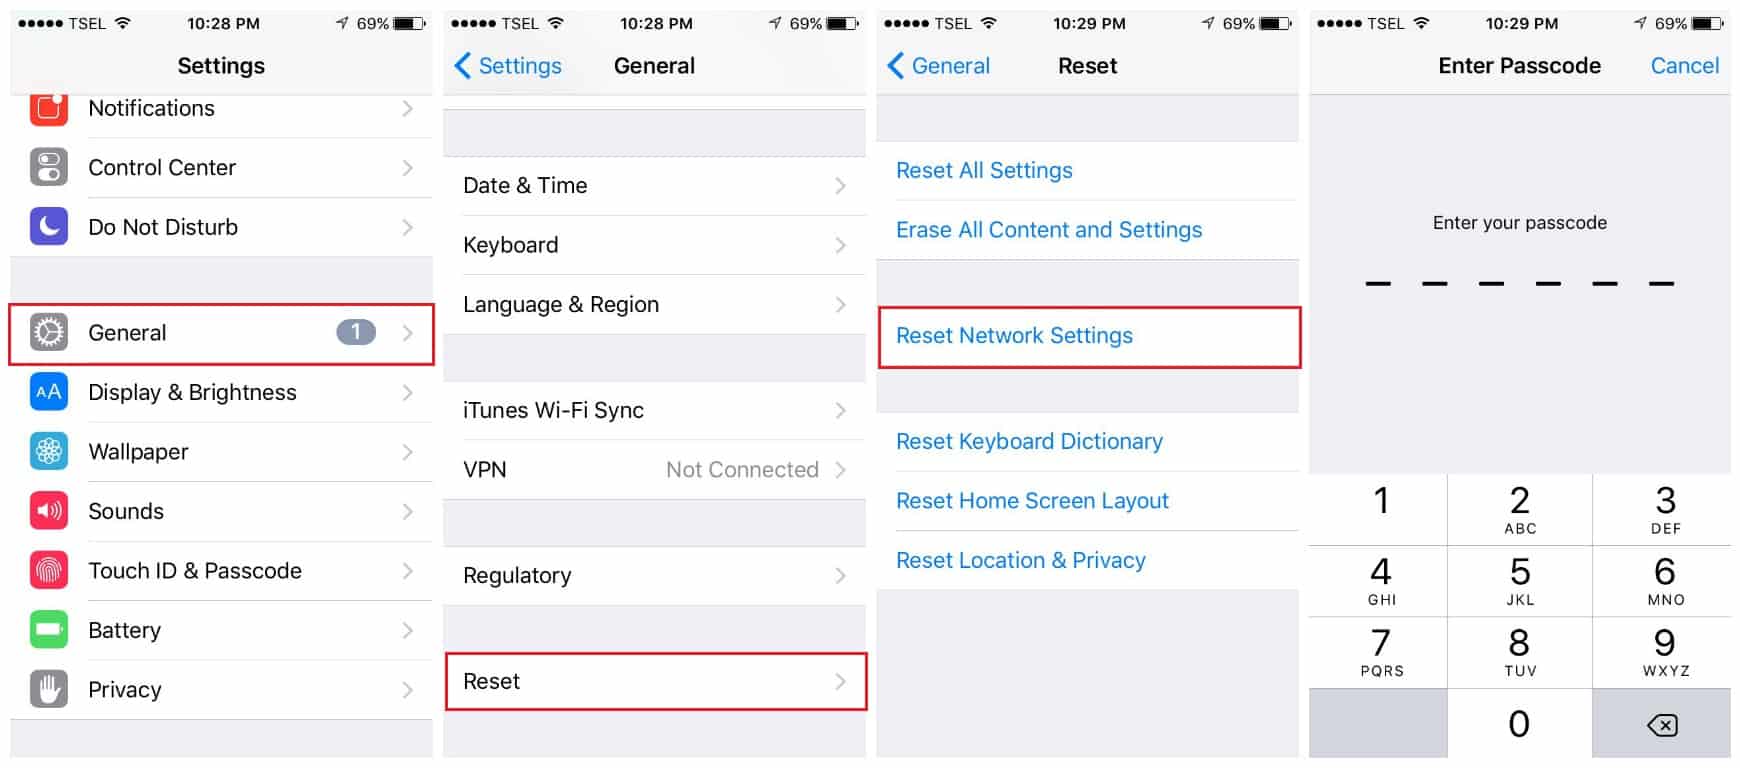 Recognized Wi-Fi networks from your iPhone